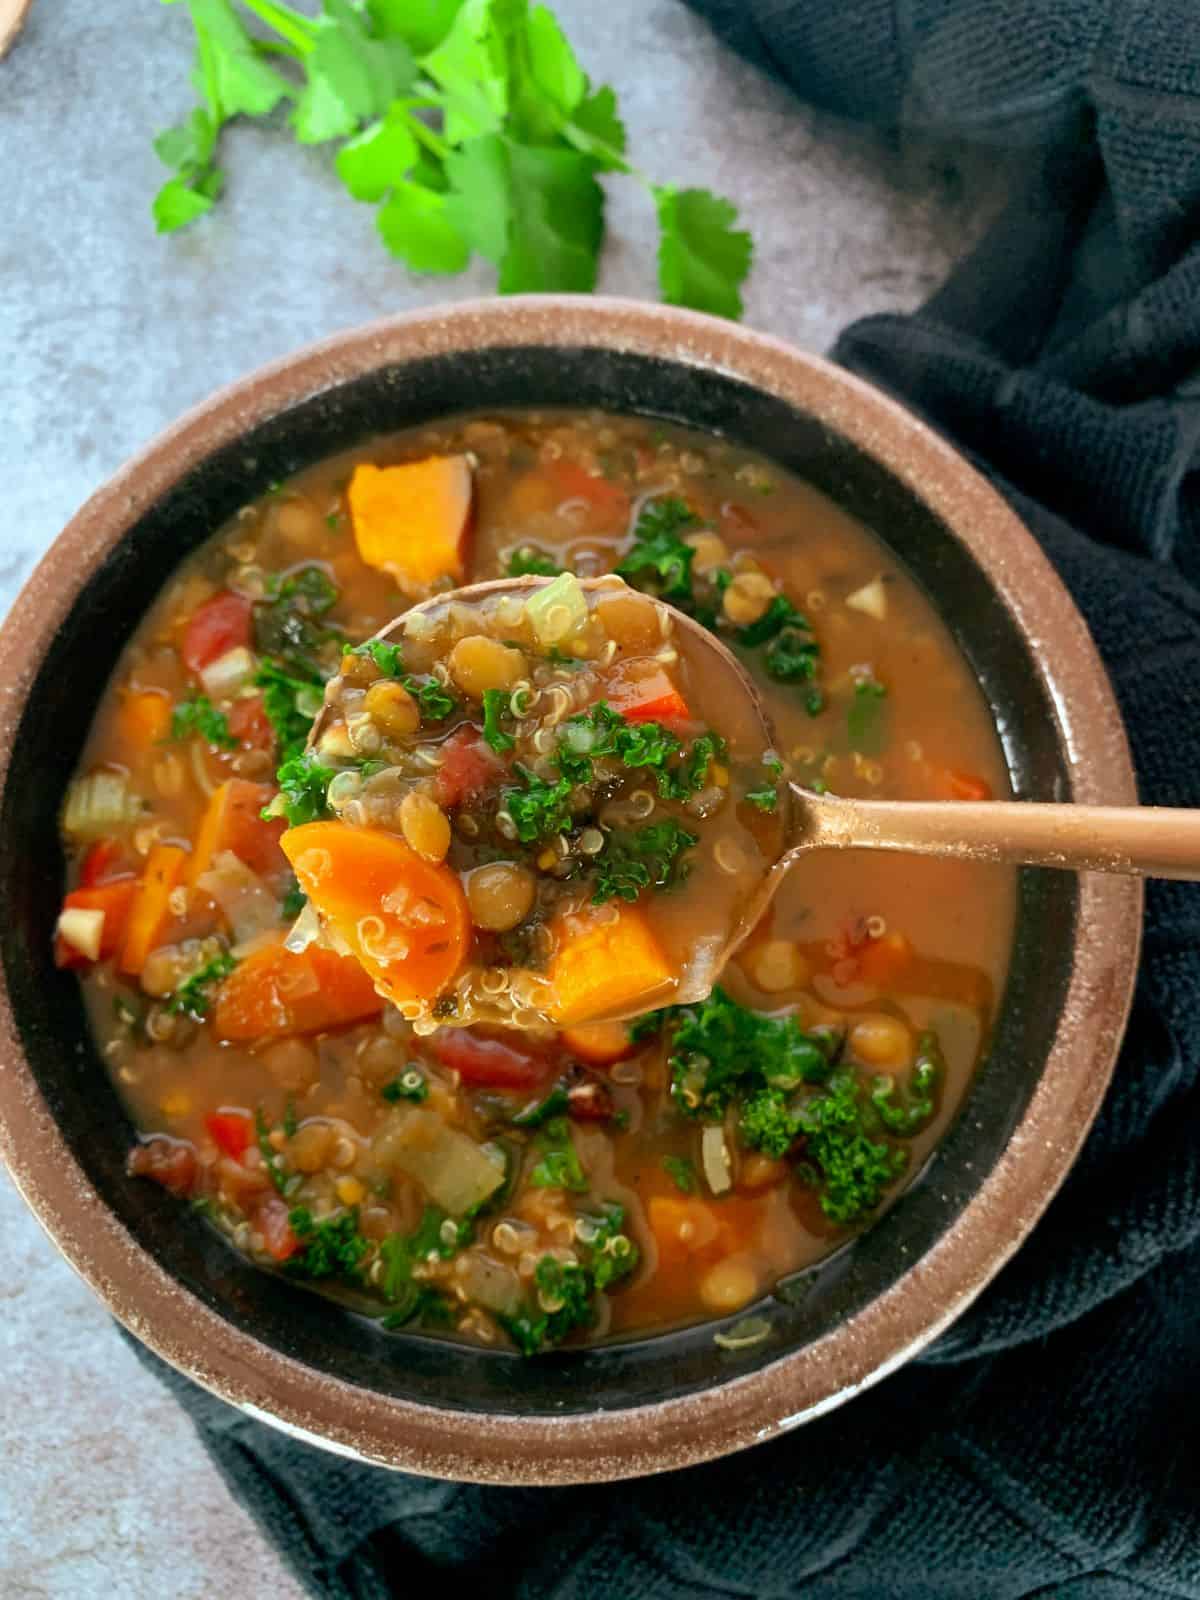 Lentil Quinoa soup in a bowl with a bite on a spoon. Soup is full of kale, peppers, sweet potatoes and more.